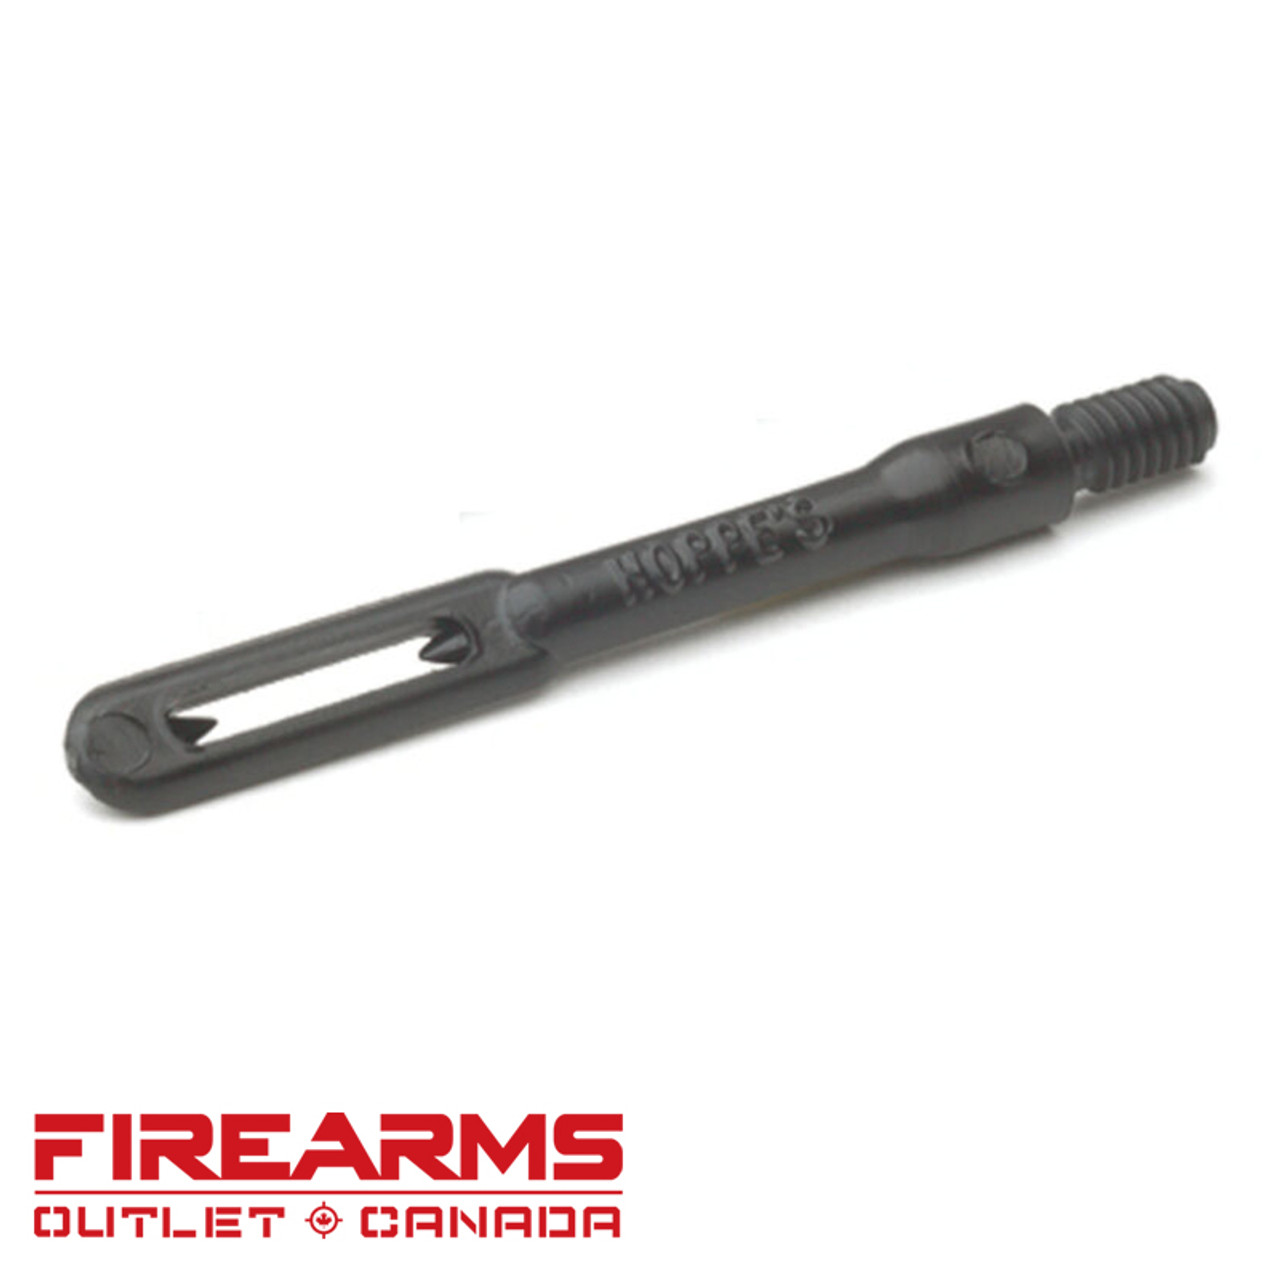 Hoppe's Slotted End for Cleaning Rods - 16-12 Gauge  [1416]